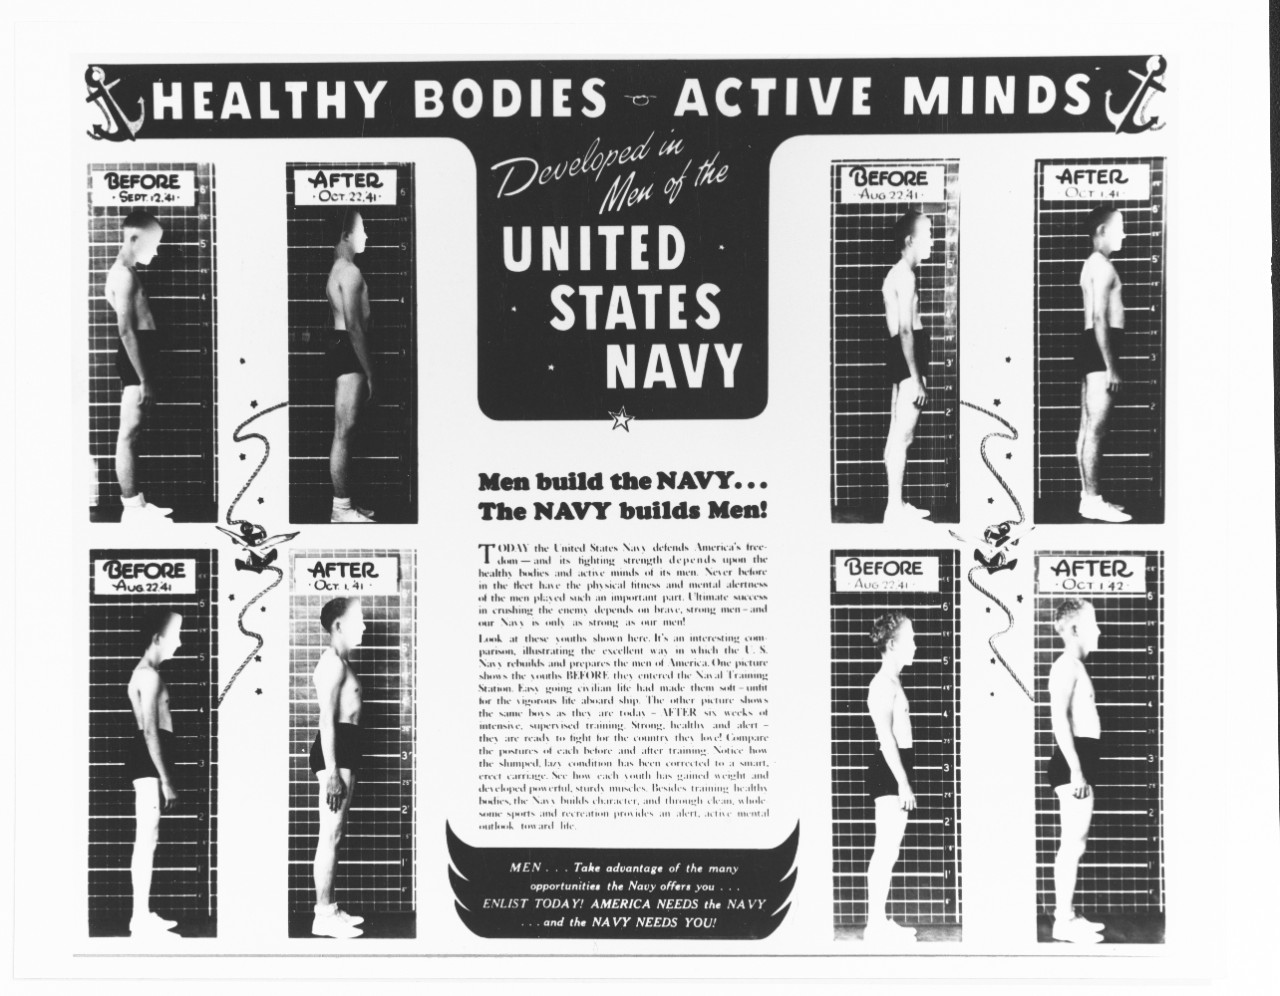 Navy poster, "Healthy bodies, active minds"